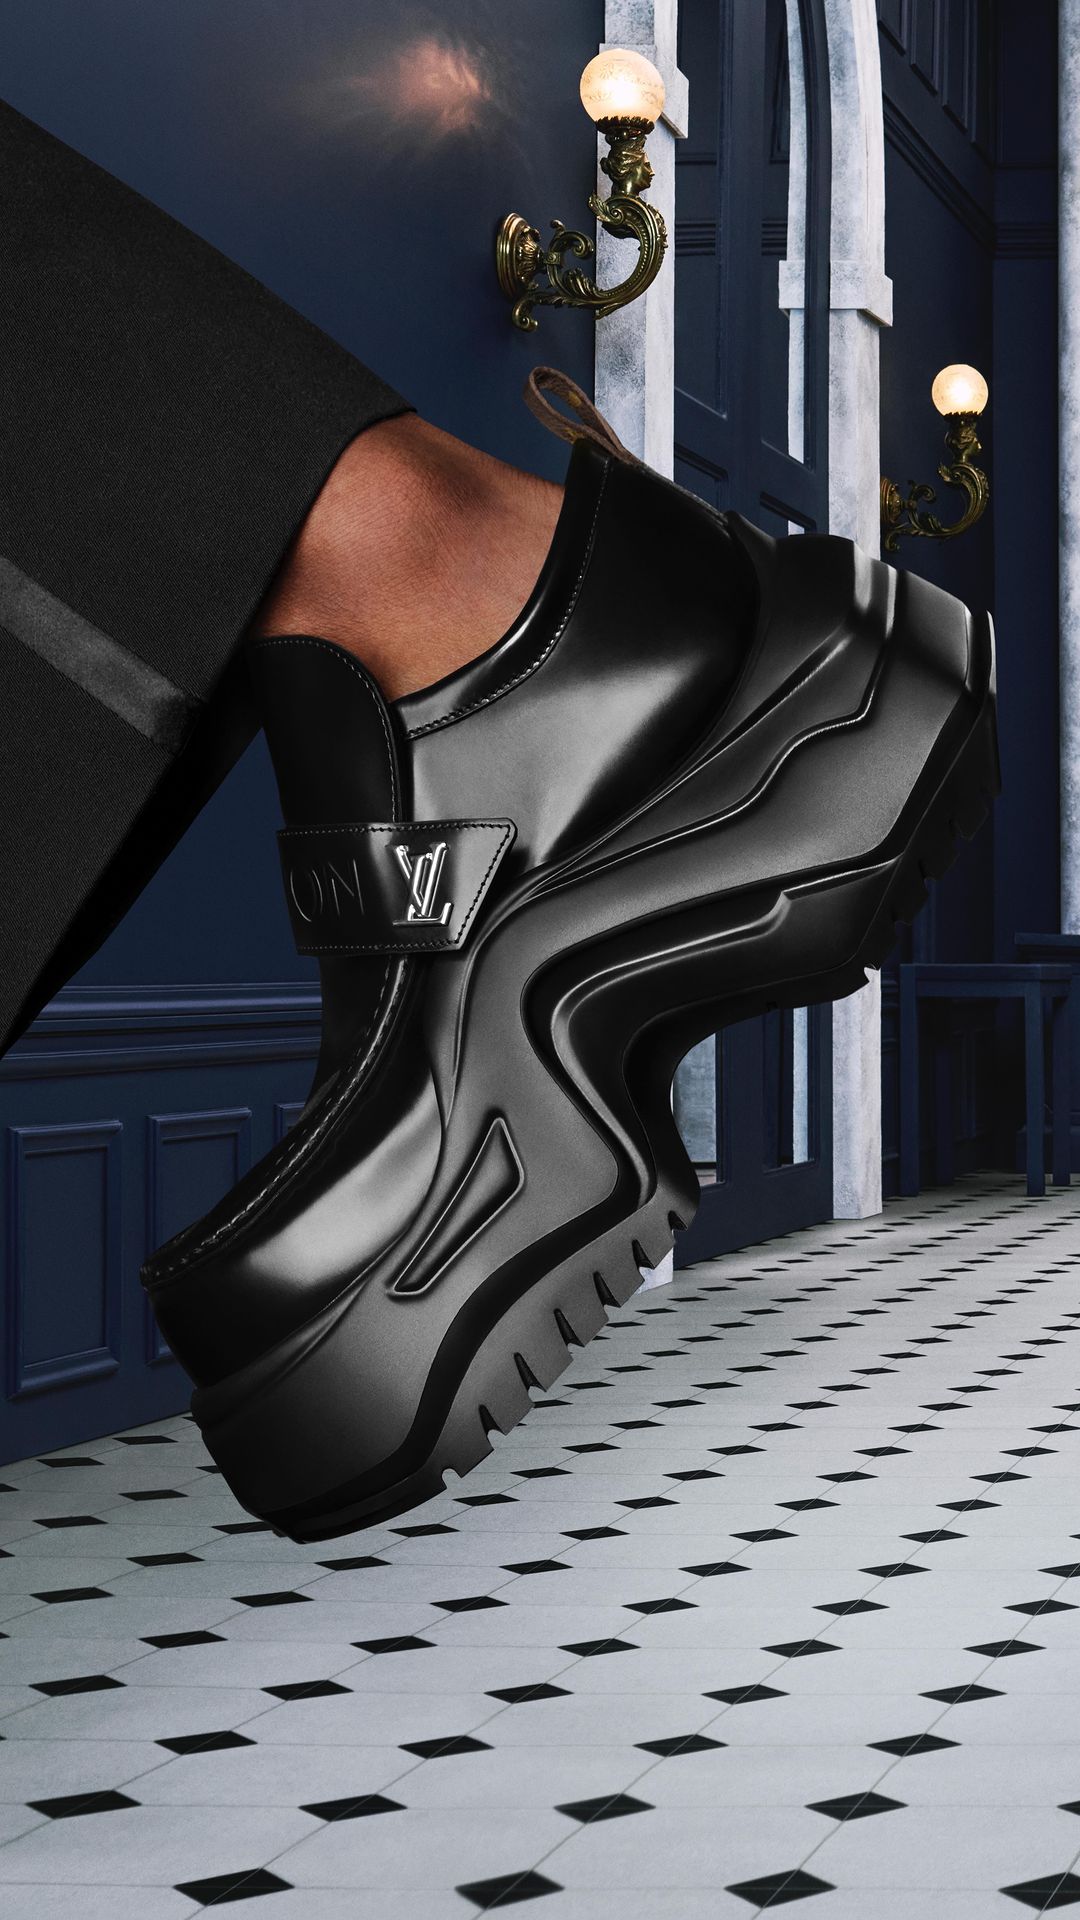 Louis Vuitton on X: #JadenSmith for #LVArchlight 2.0. Crafted from the  finest leather or enhanced with guipure lace, this striking range of  platform shoes by #LouisVuitton exudes a sleek elegance with a